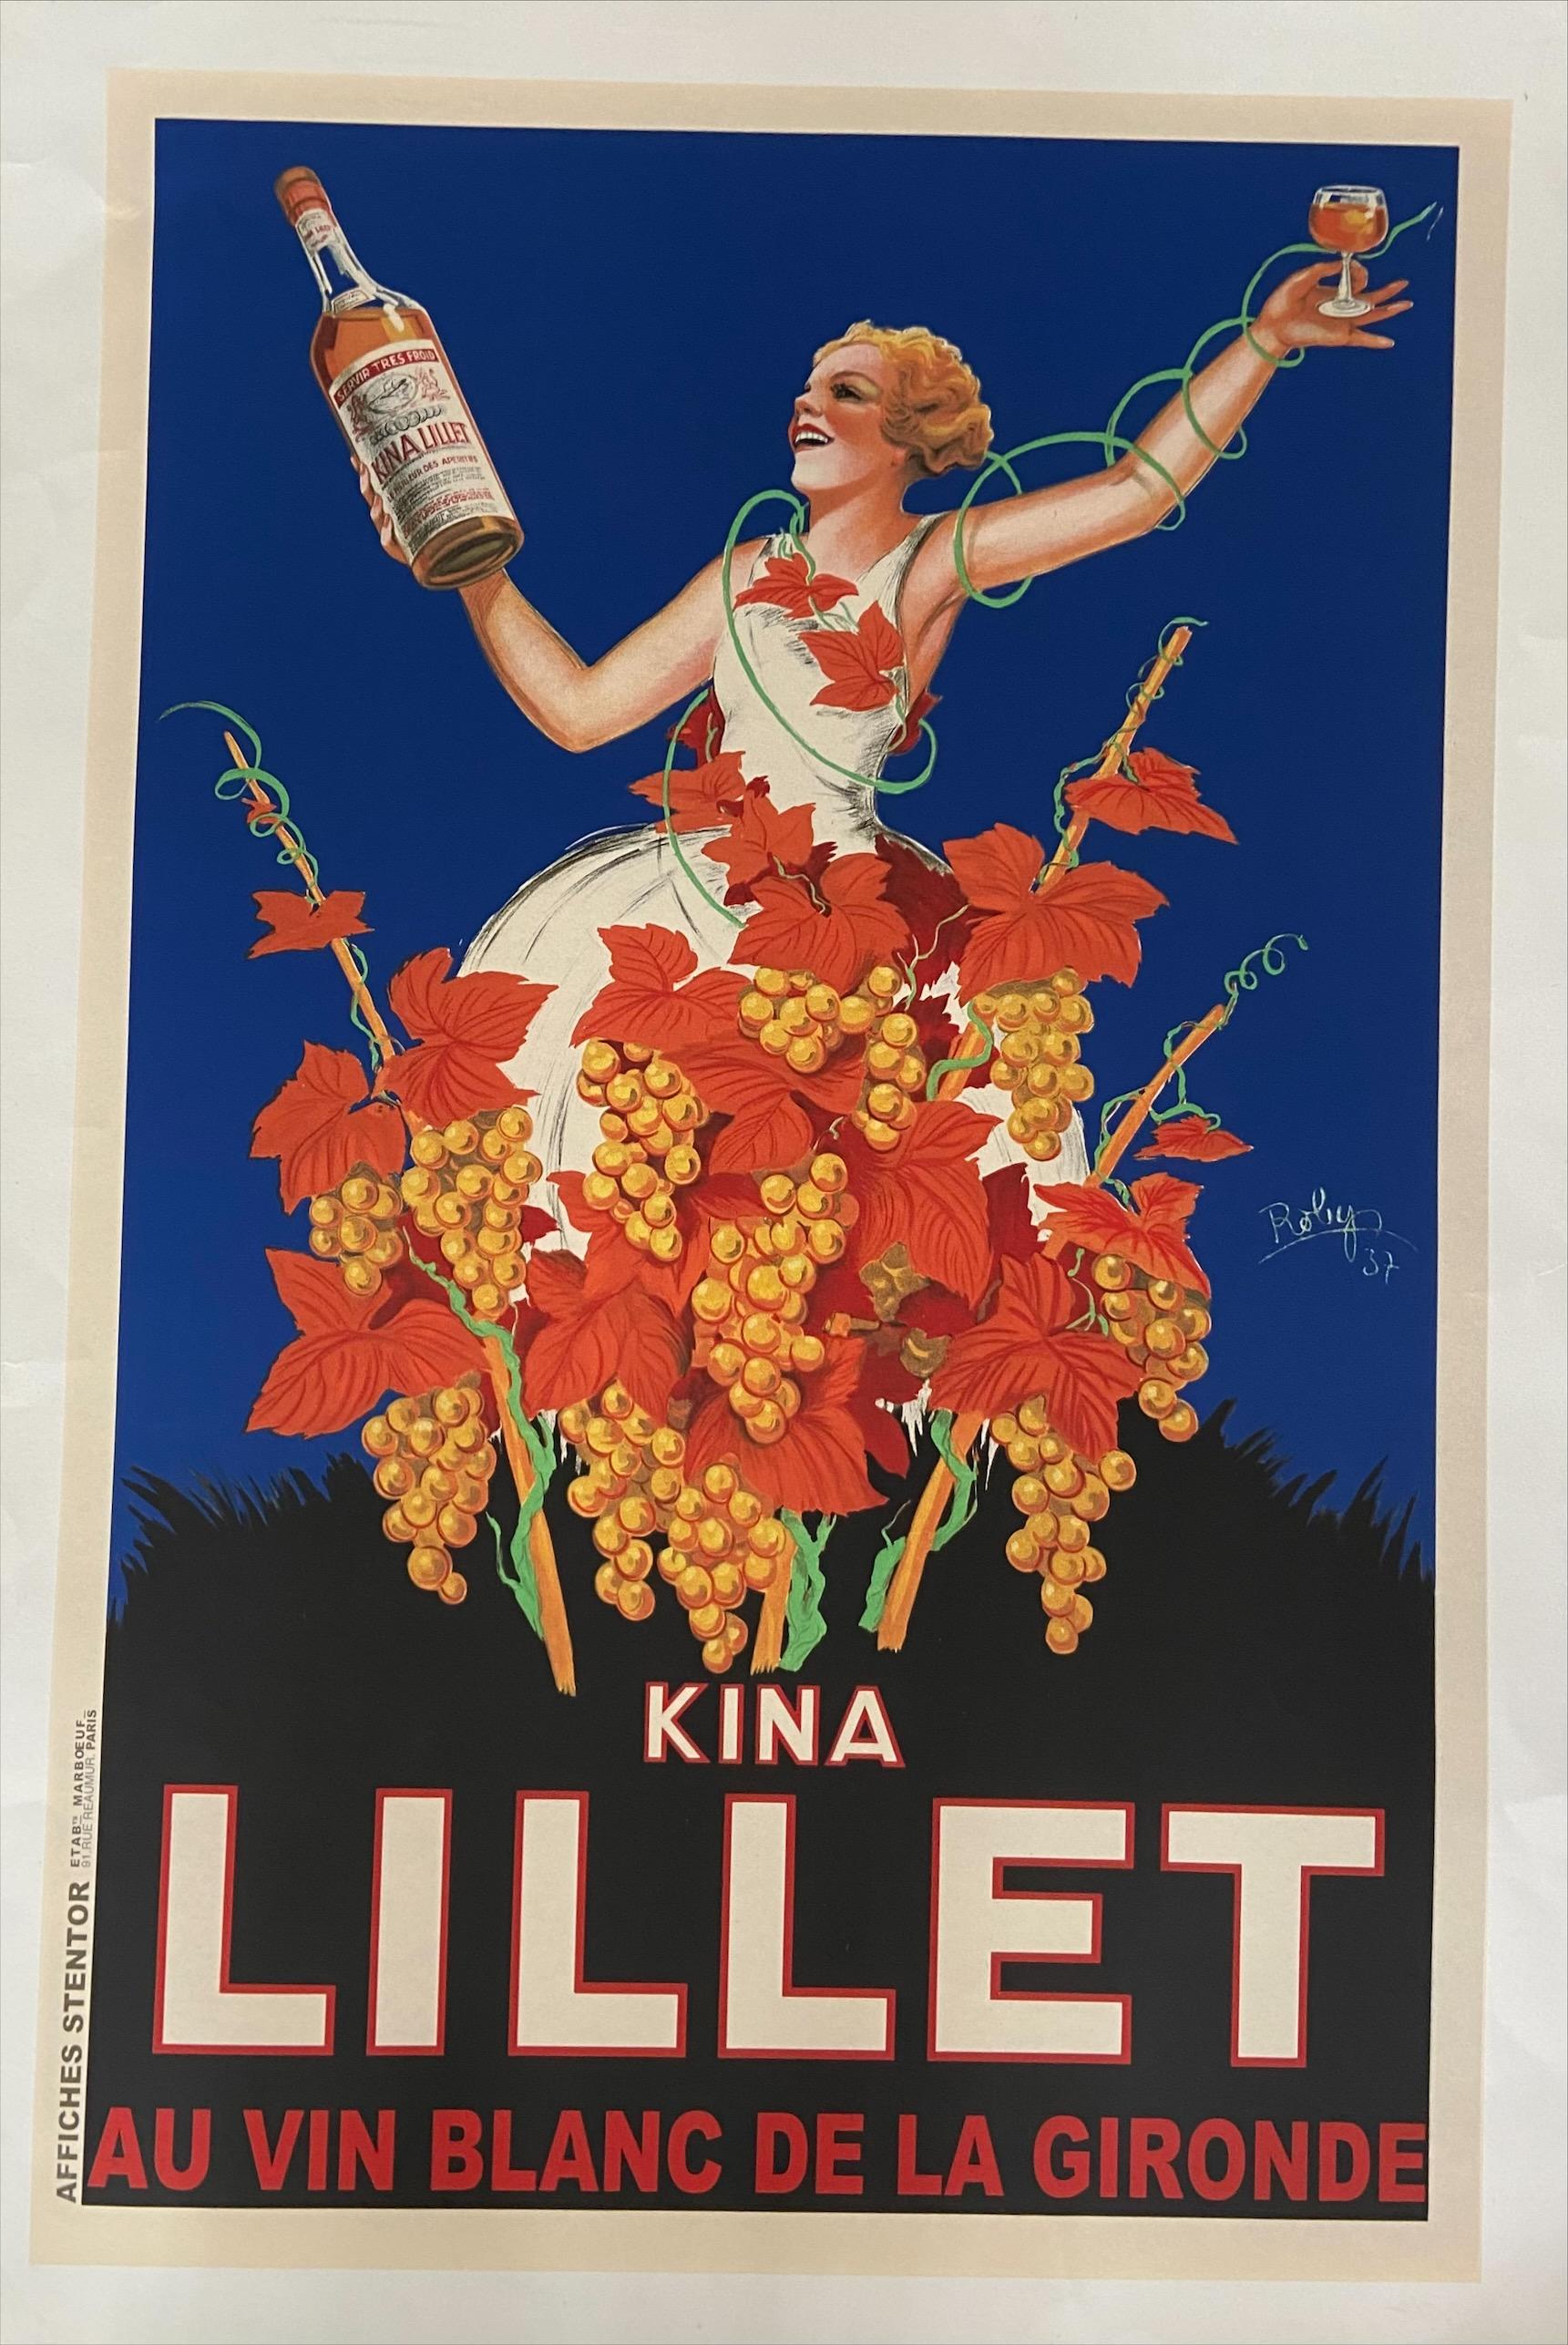 Poster Kina Lillet - Robys (Robert Wolff)
Lithograph mounted on canvas
1937
Stentor printing
130x197cm
Signed and dated
In very good condition.